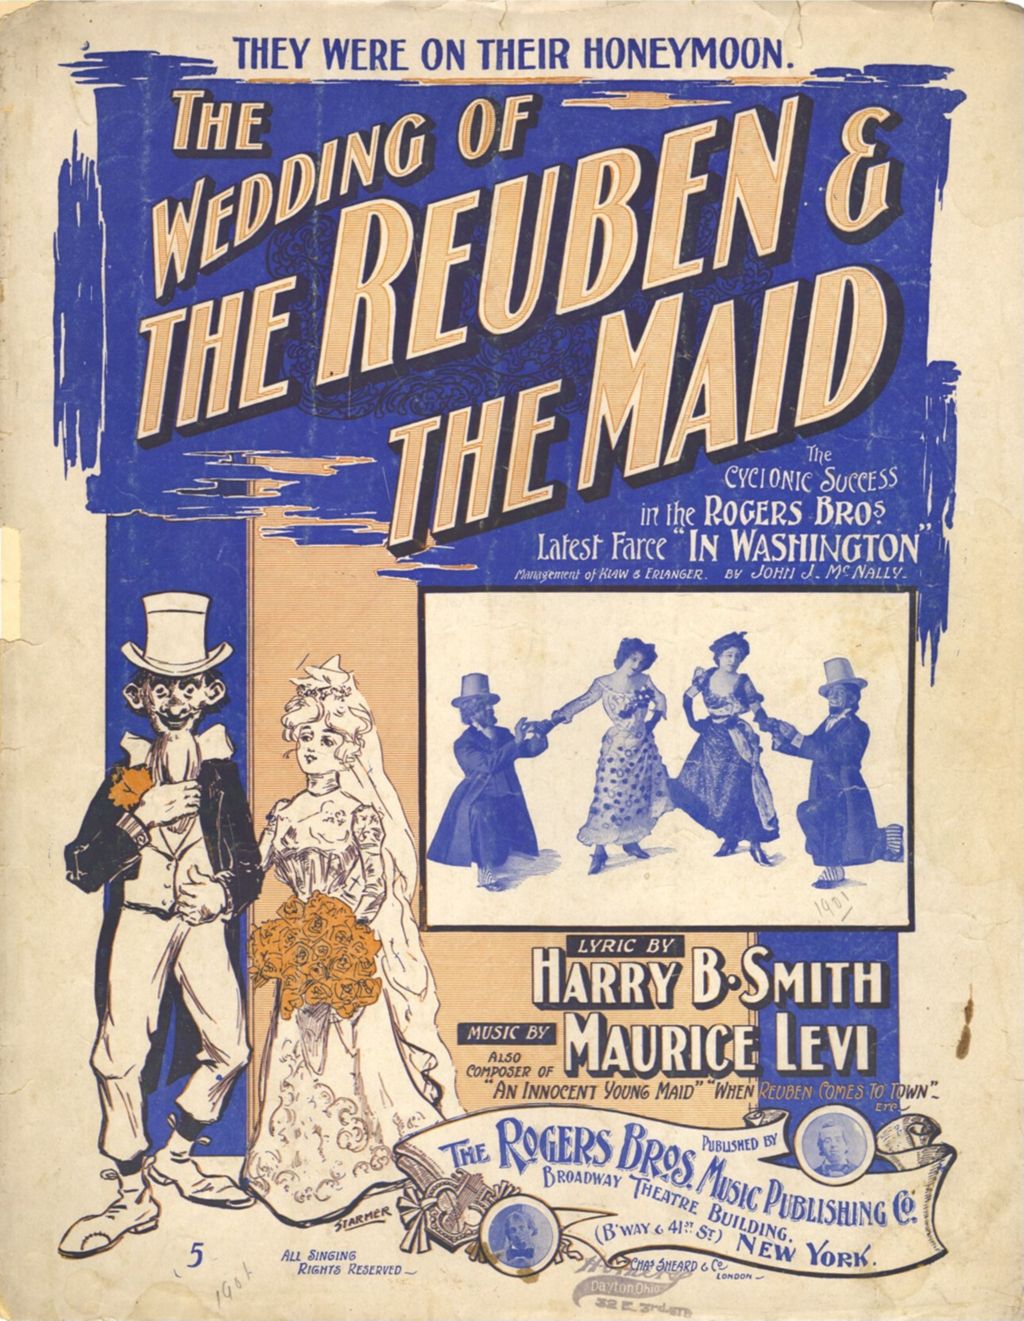 Wedding of the Reuben and the Maid, or, They were on their Honeymoon